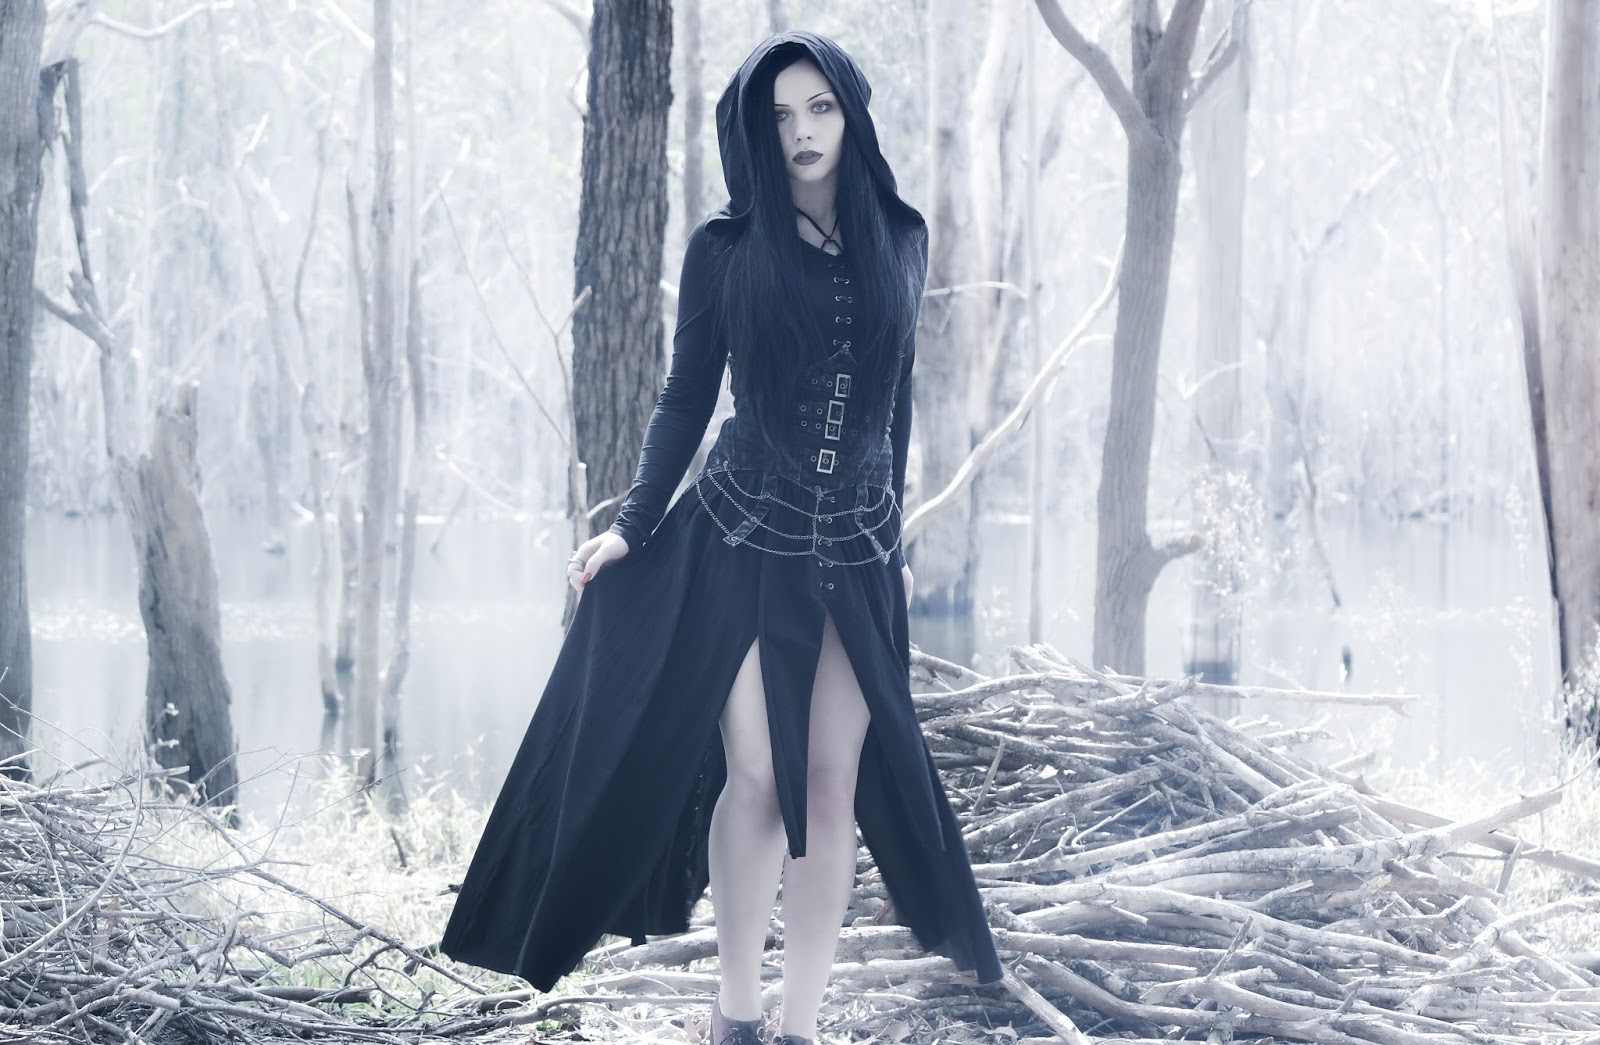 ReeRee Phillips  Gothic fashion, Gothic fashion victorian, Gothic outfits